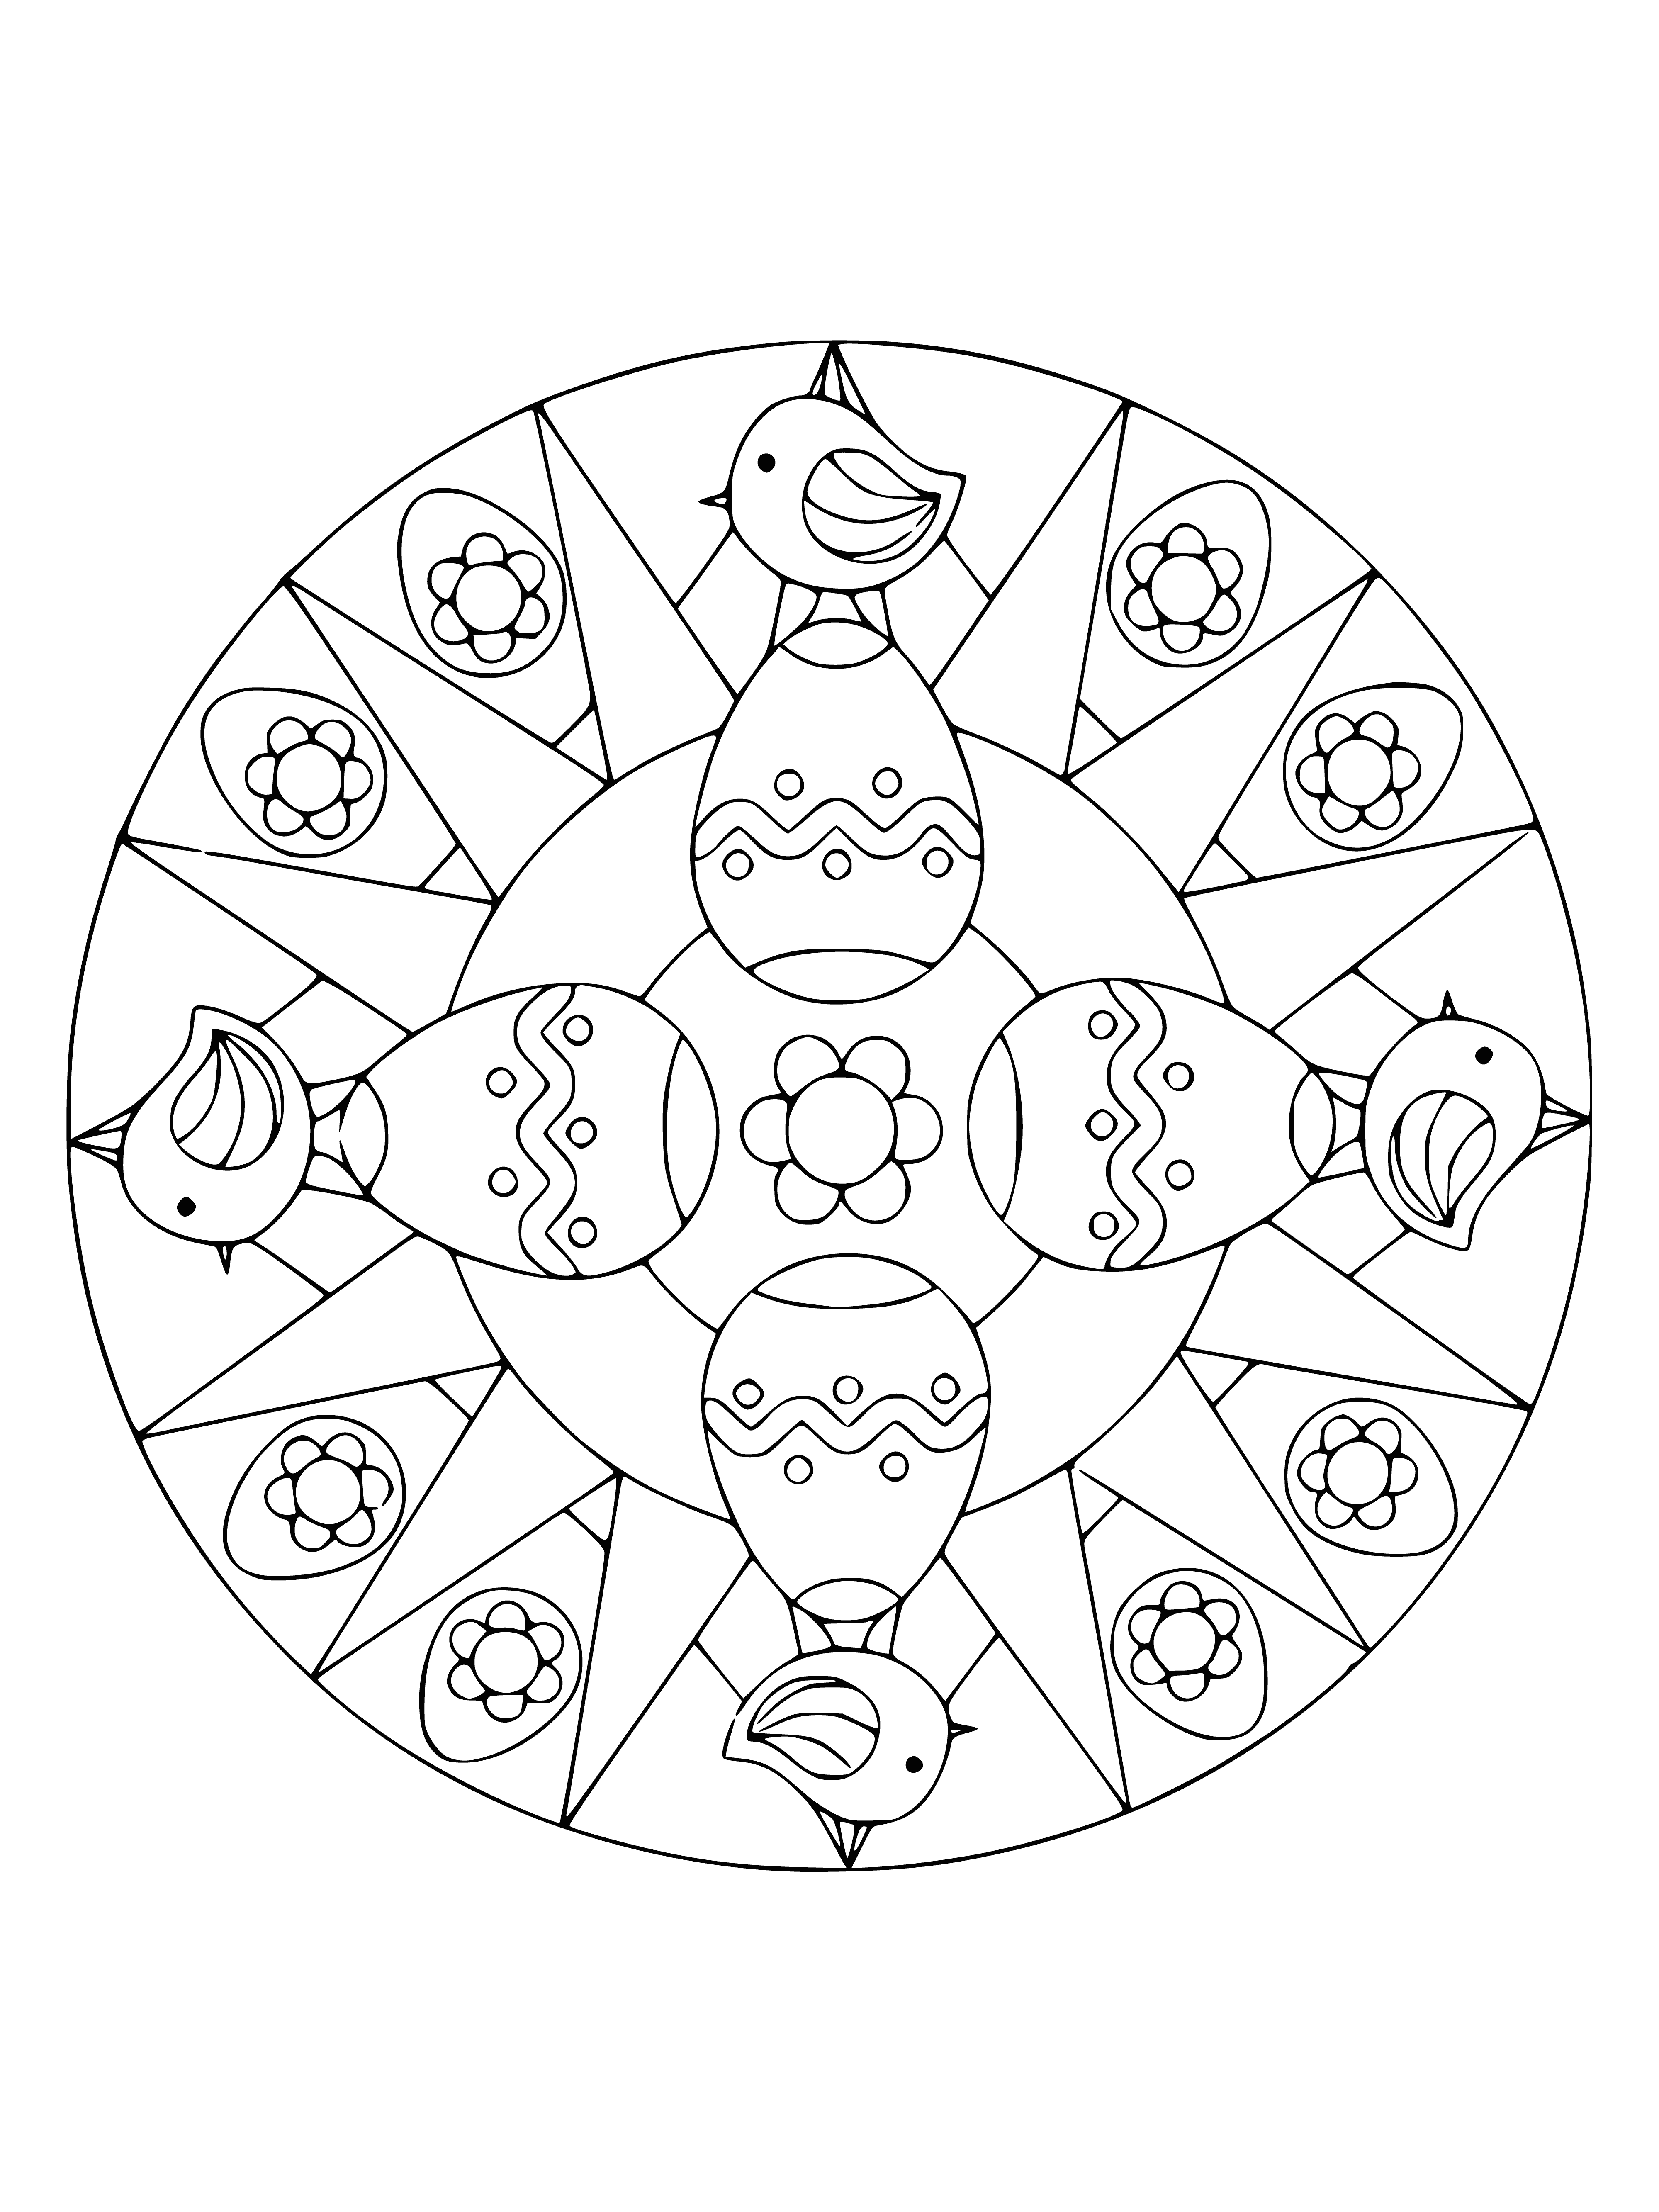 coloring page: Mandalas are religious/spiritual symbols used for meditation & art. The Easter mandala has a central cross surrounded by Easter eggs, bunnies, flowers & words.